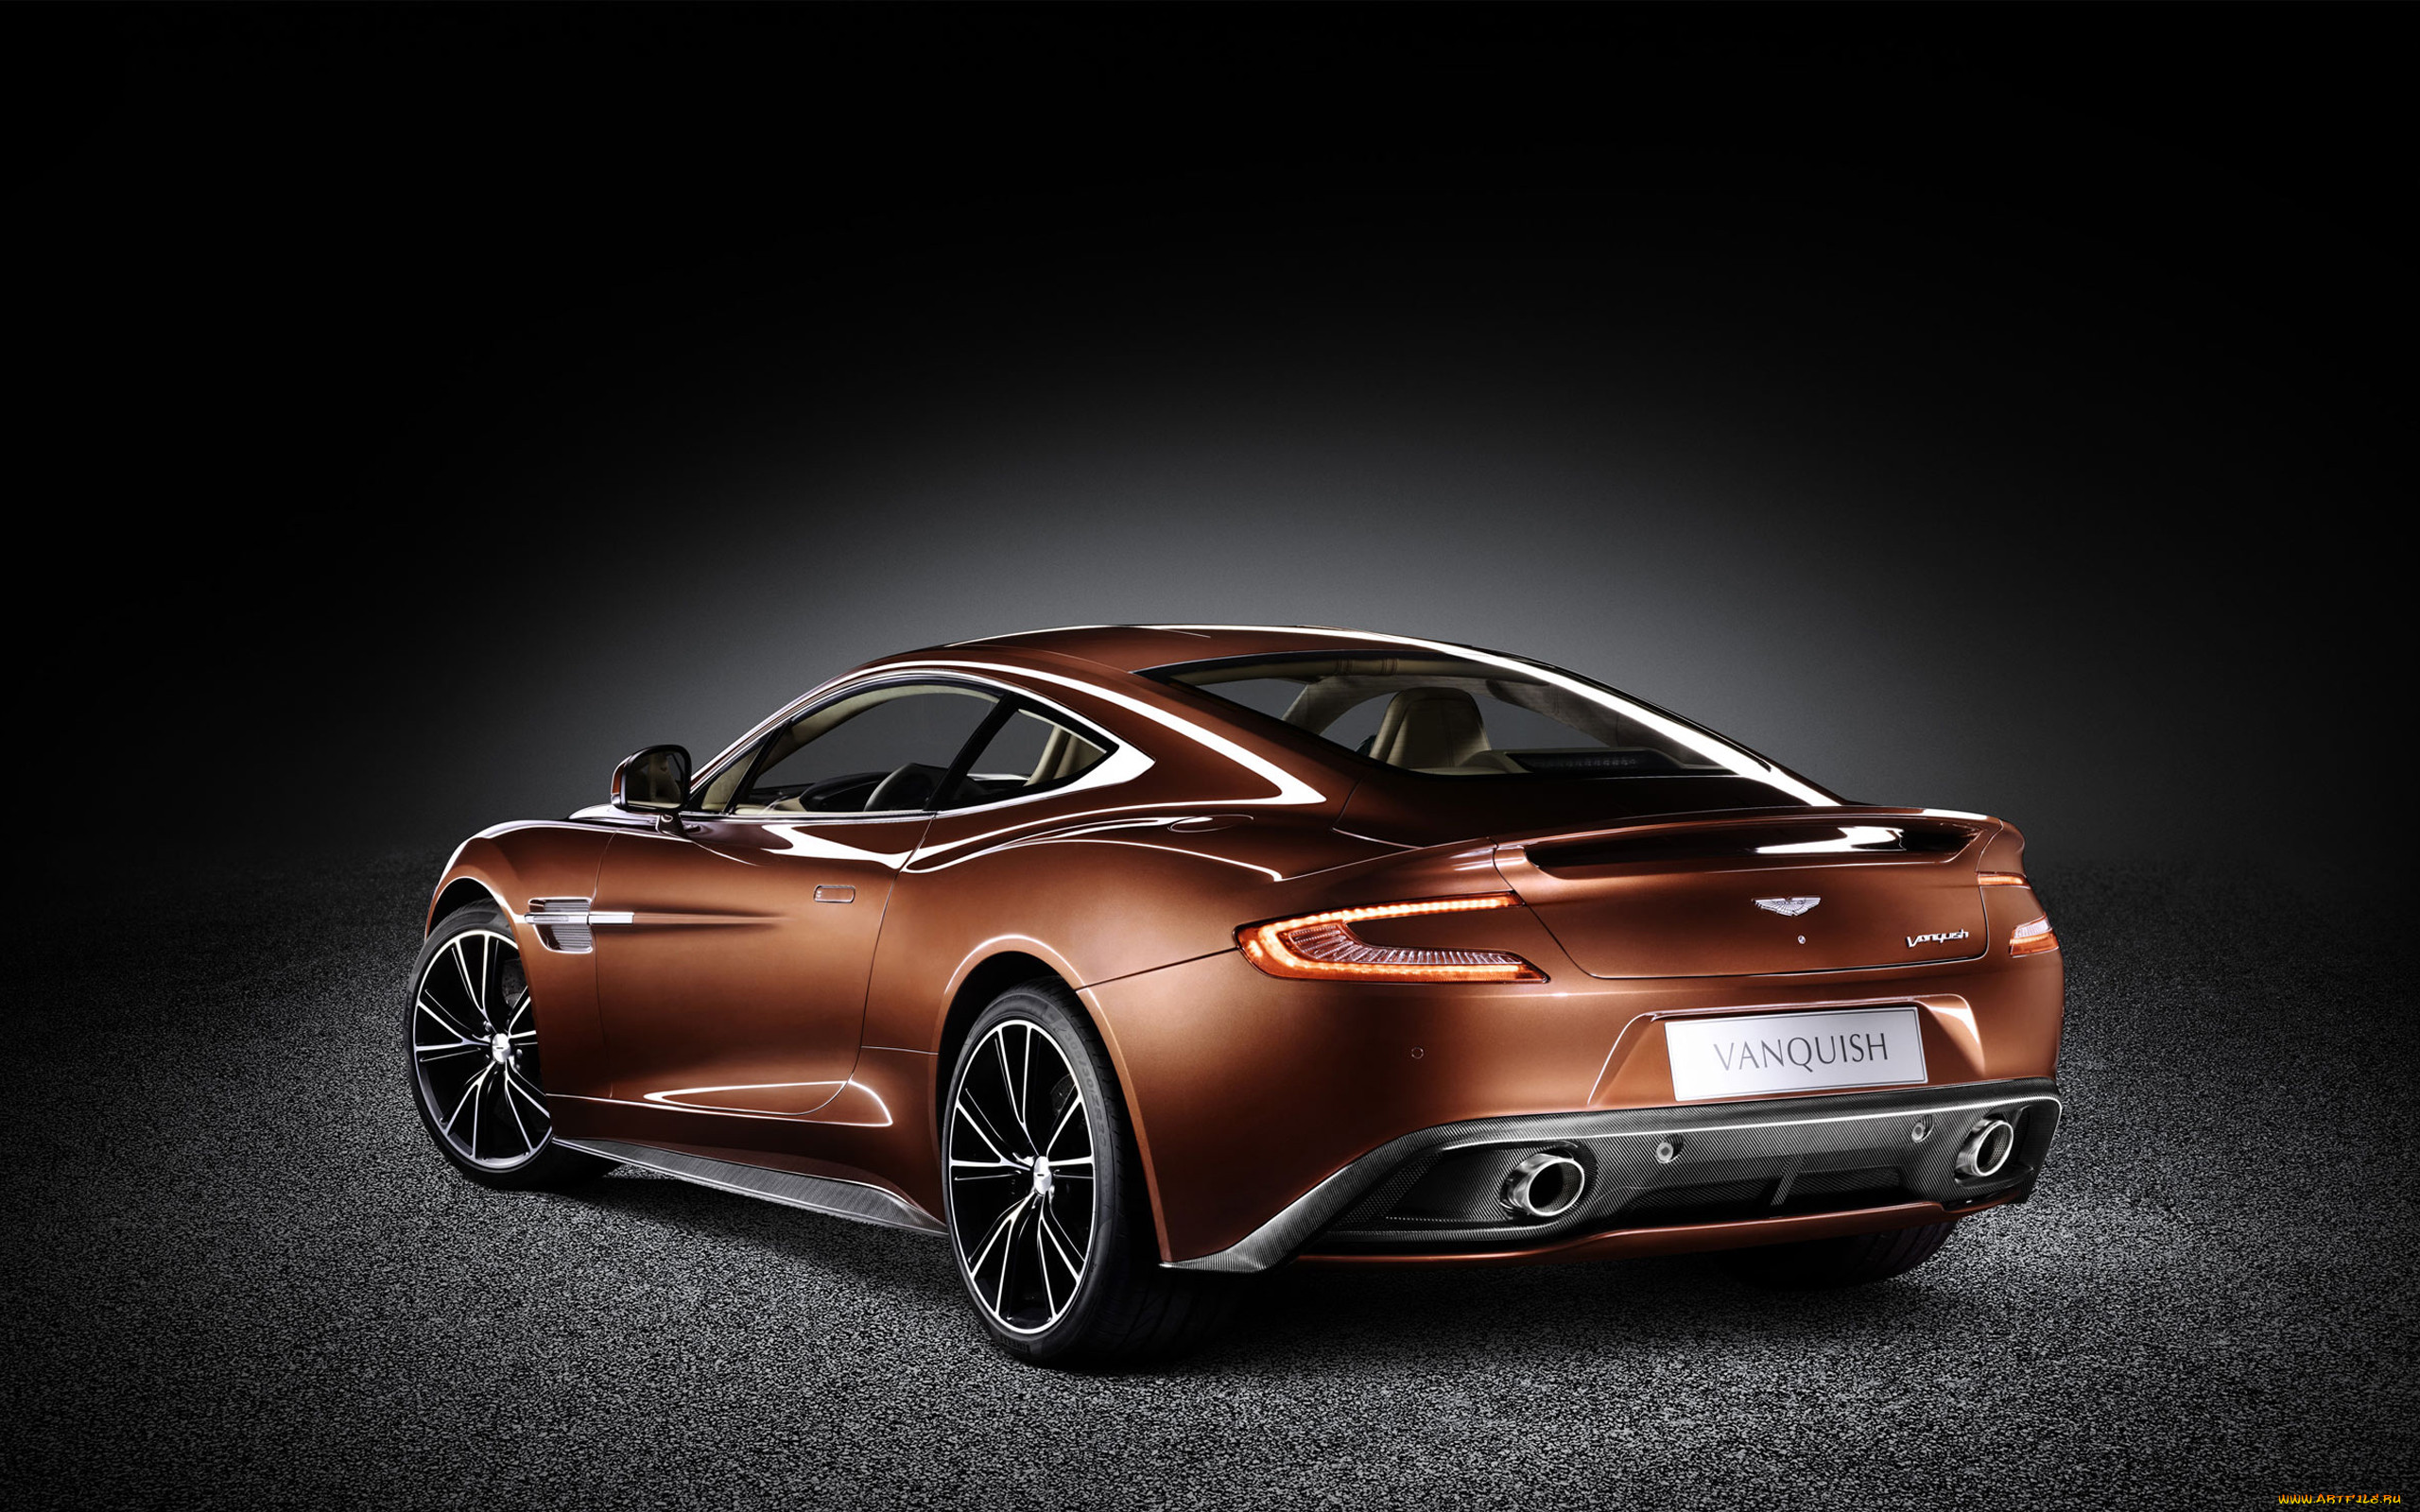 , aston, martin, am, 310, subsection, vanquish, sports